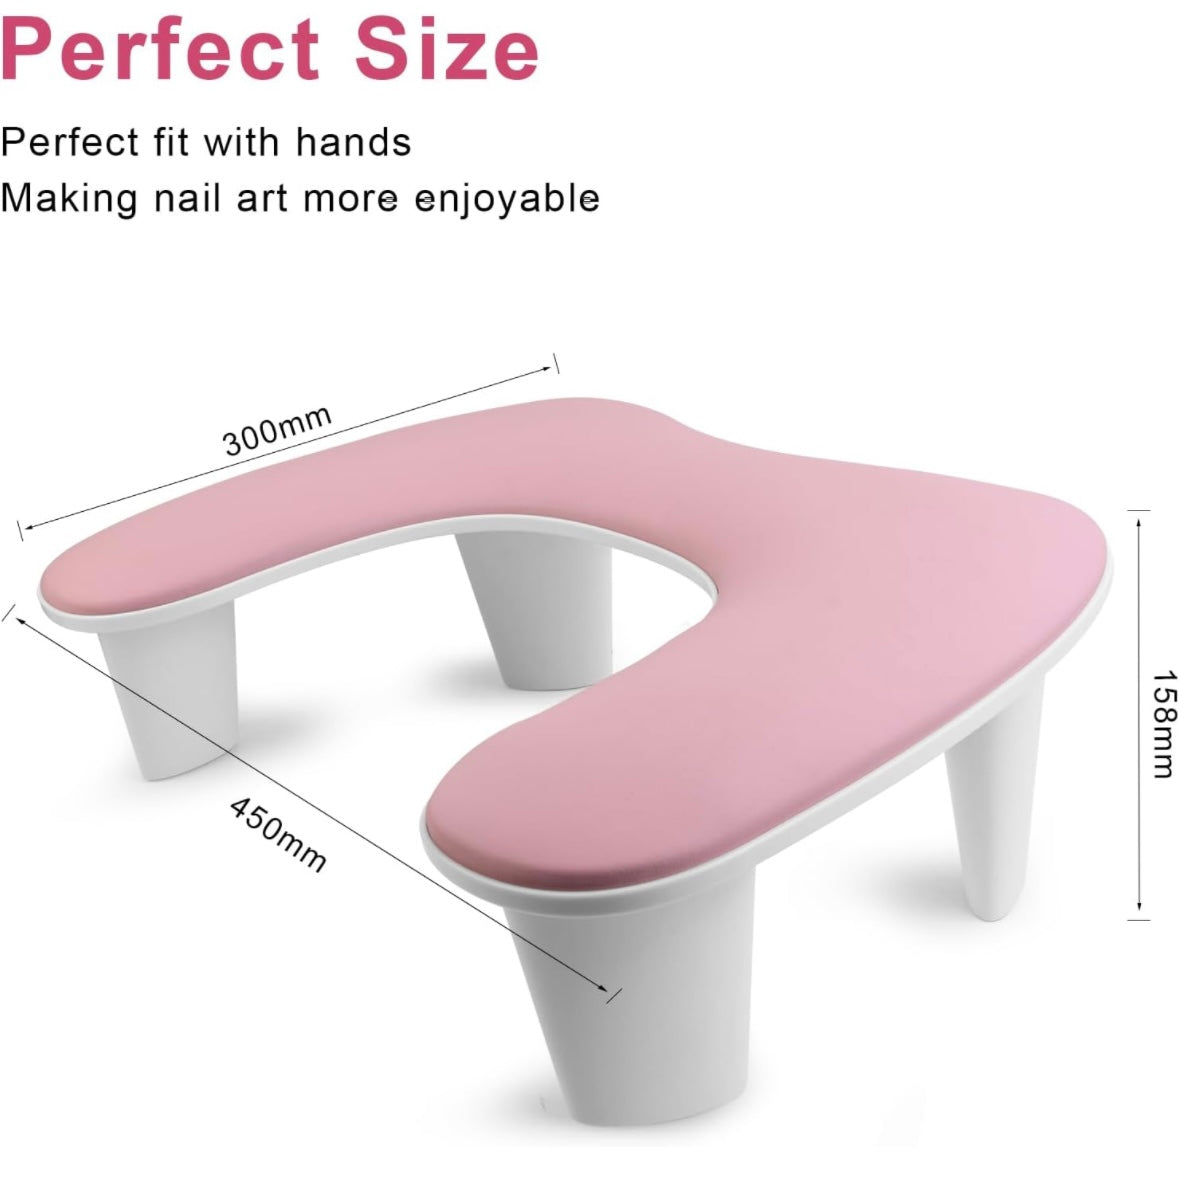 Manicure Nail Stand (Butterfly Arm Rest)